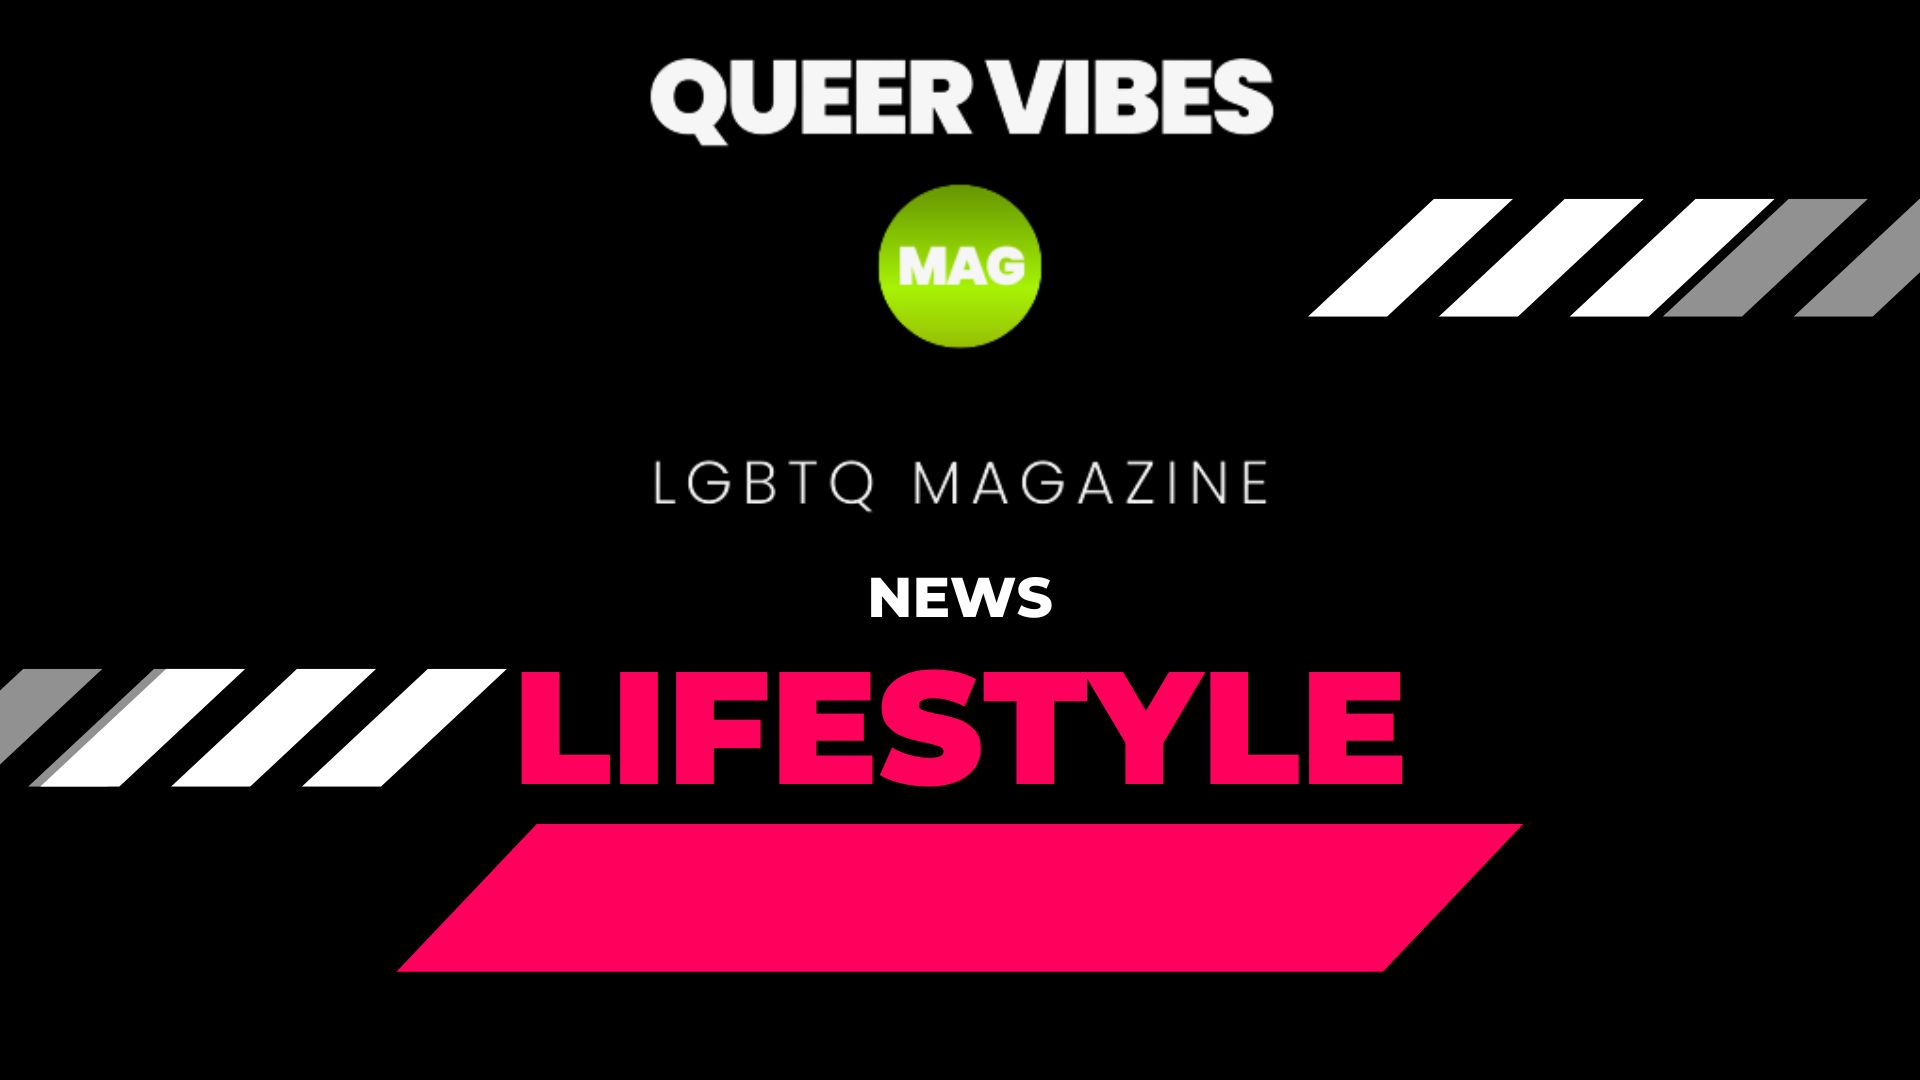 QUEER VIBES MAG logo and text highlighting LGBT lifestyle news section.